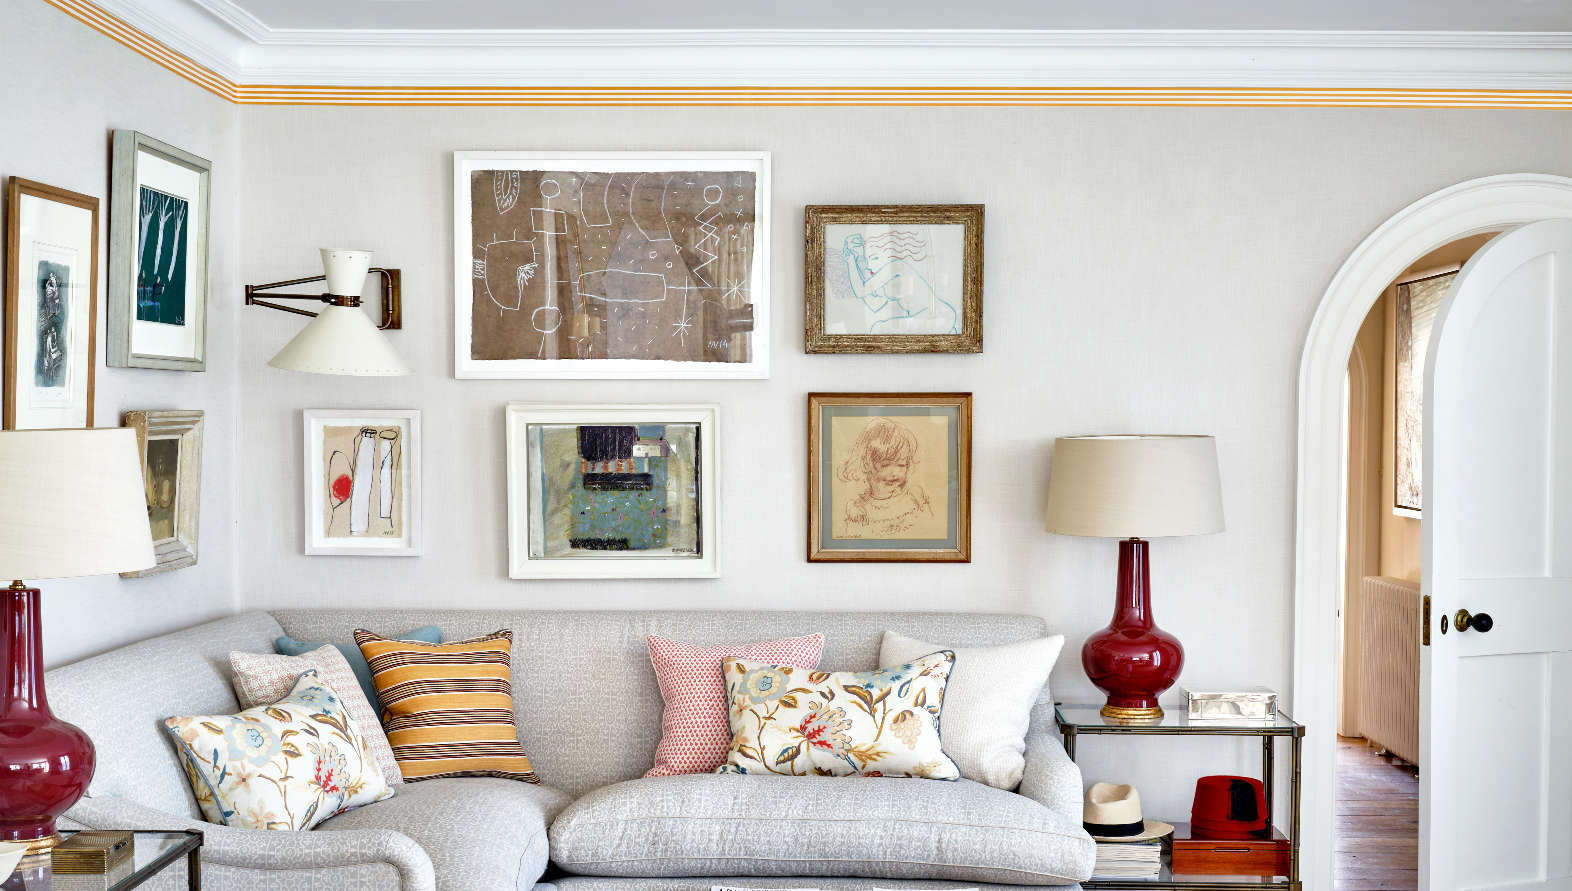 Colorful yellow wallpaper border adds a splash of color to a mostly neutral living space. 